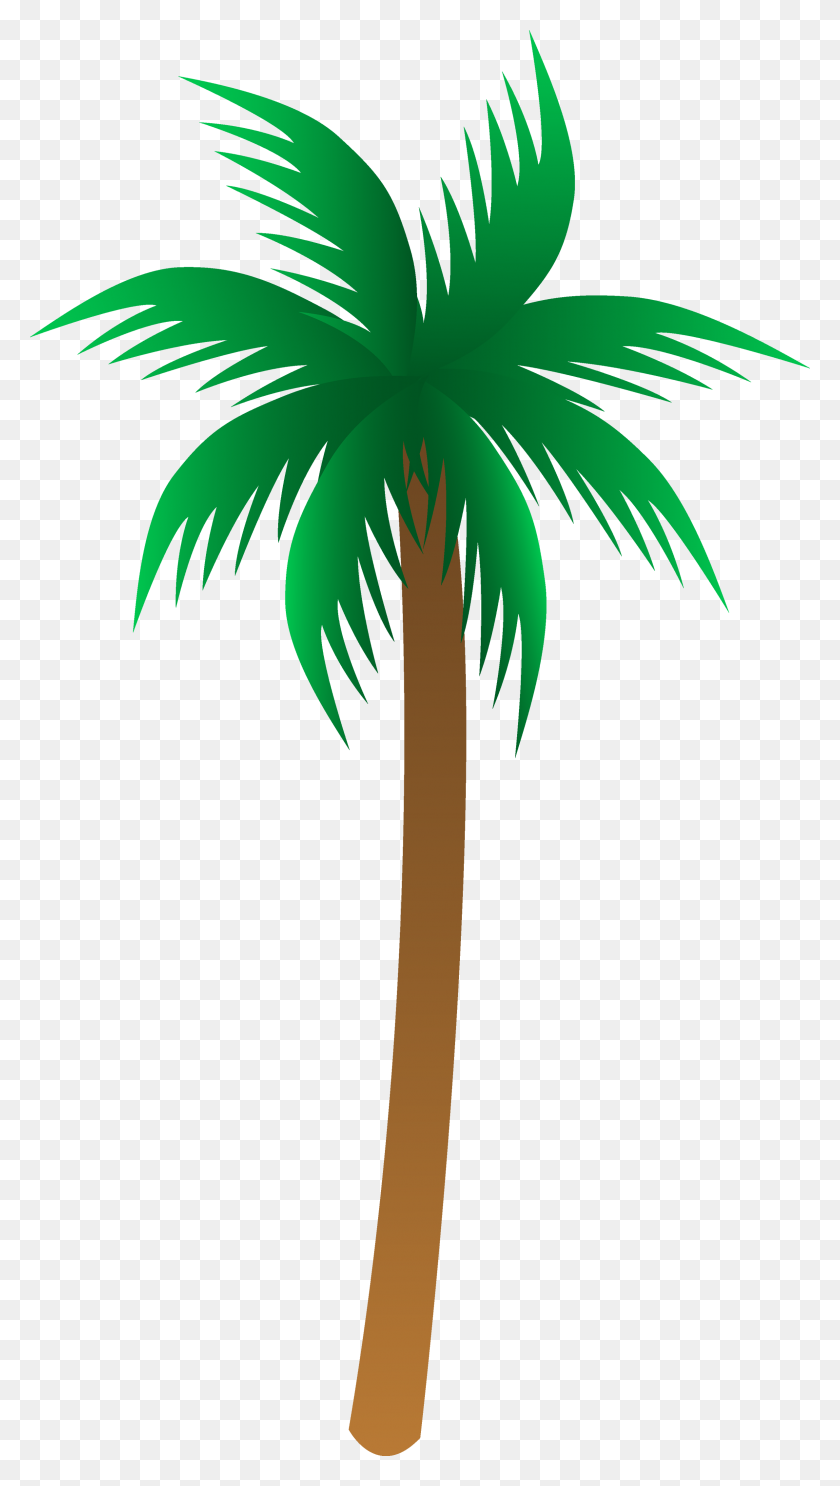 2380x4352 Palm Tree Png Image - Palm Tree PNG Transparent